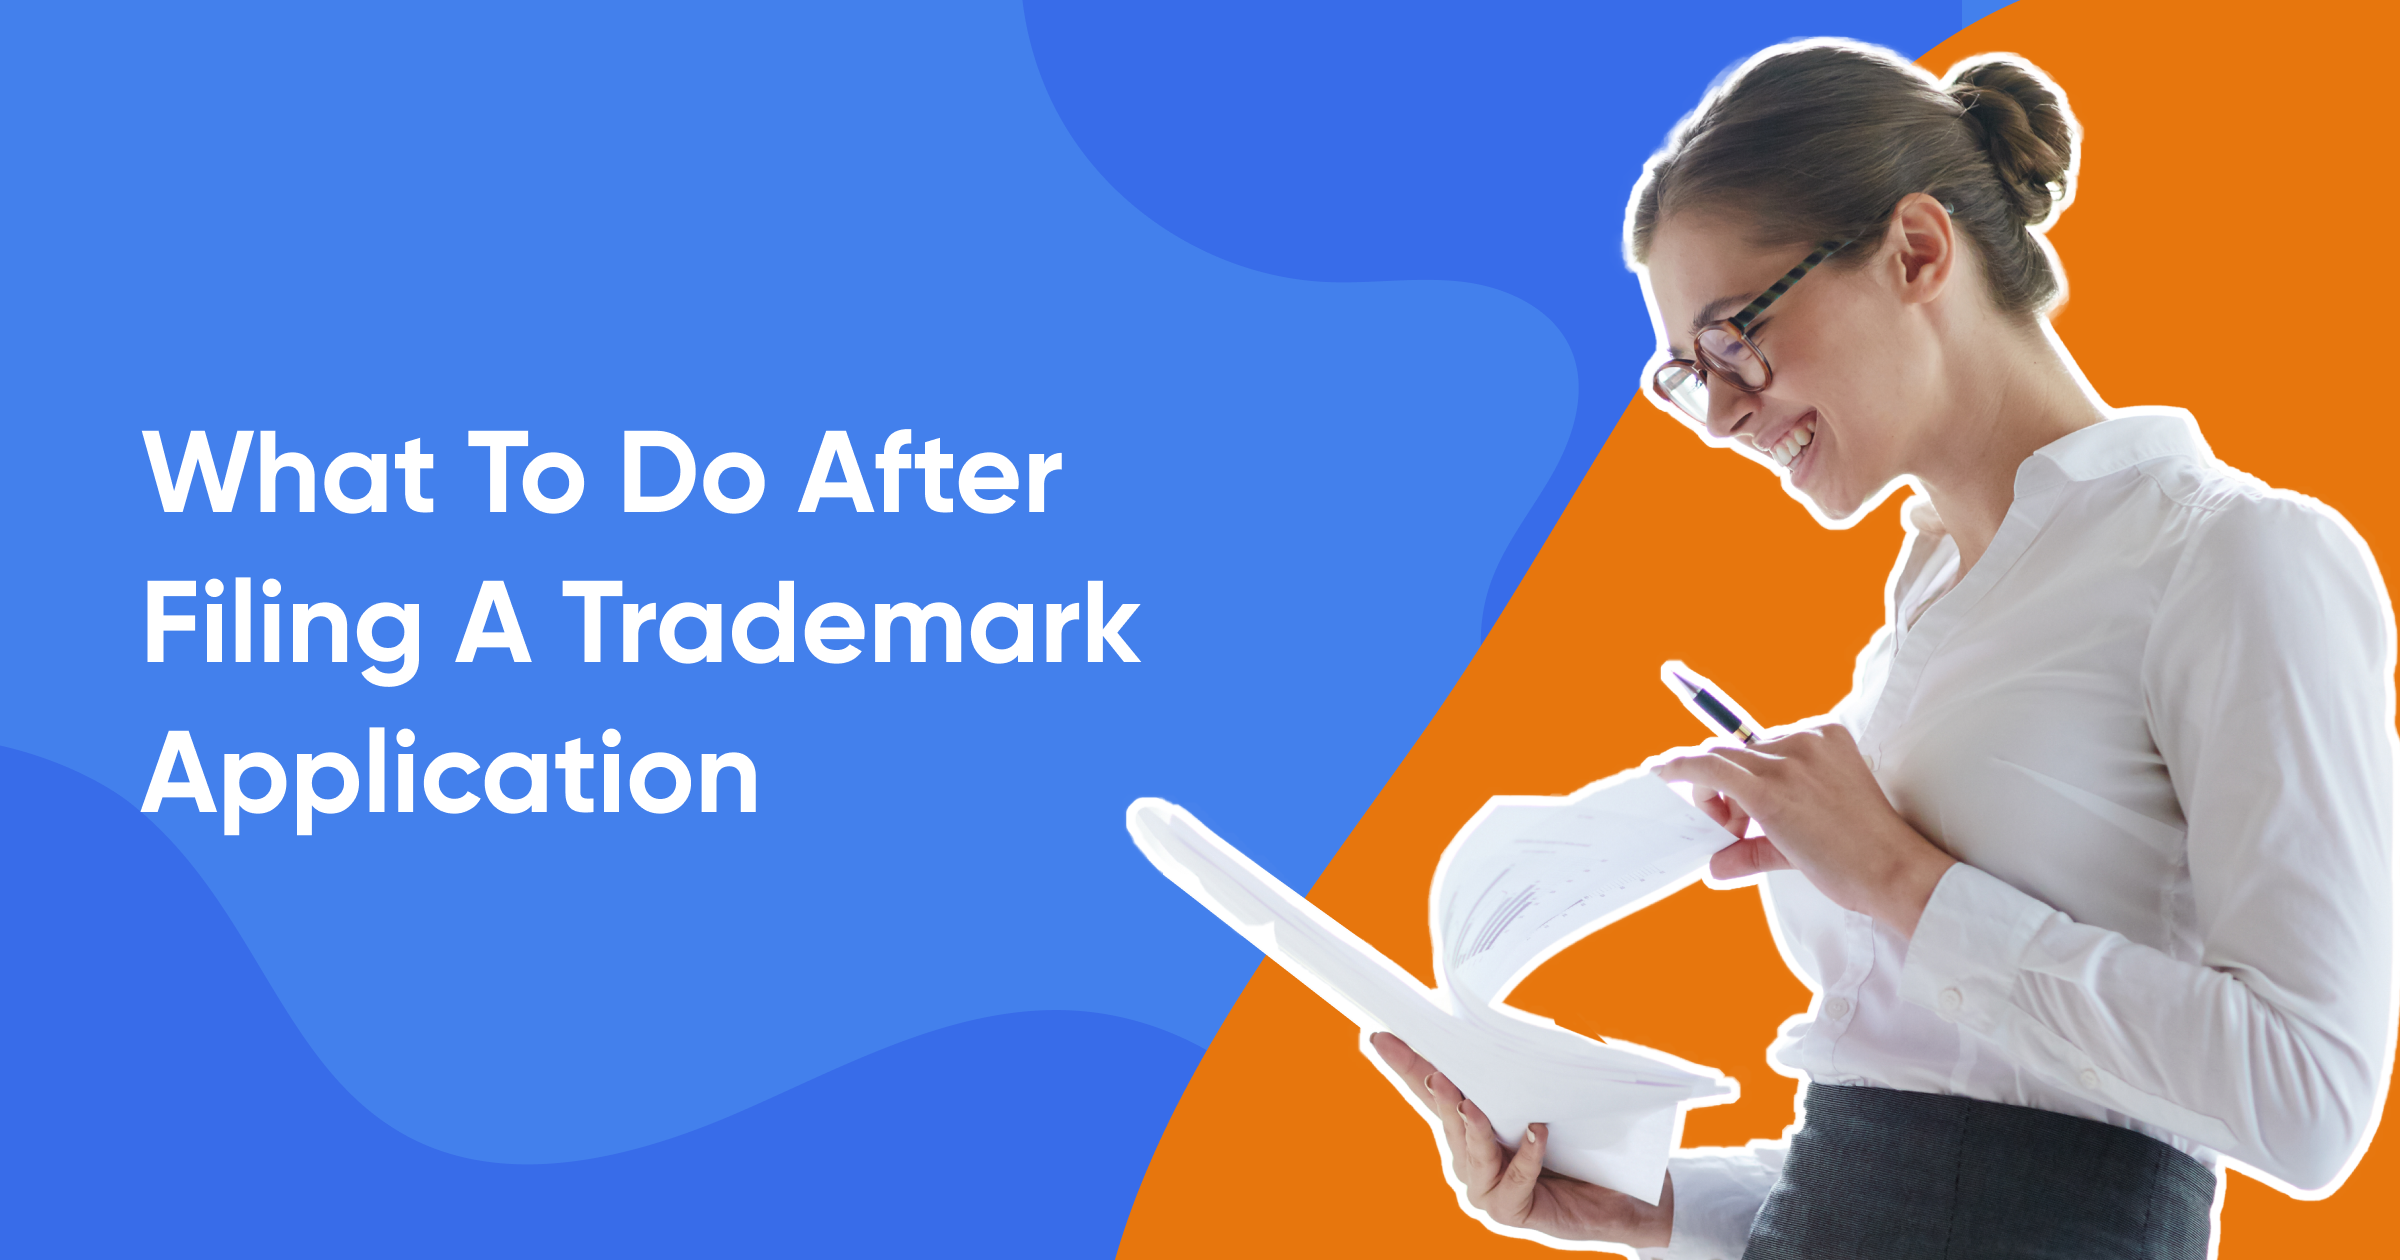 What To Do After Filing A Trademark Application